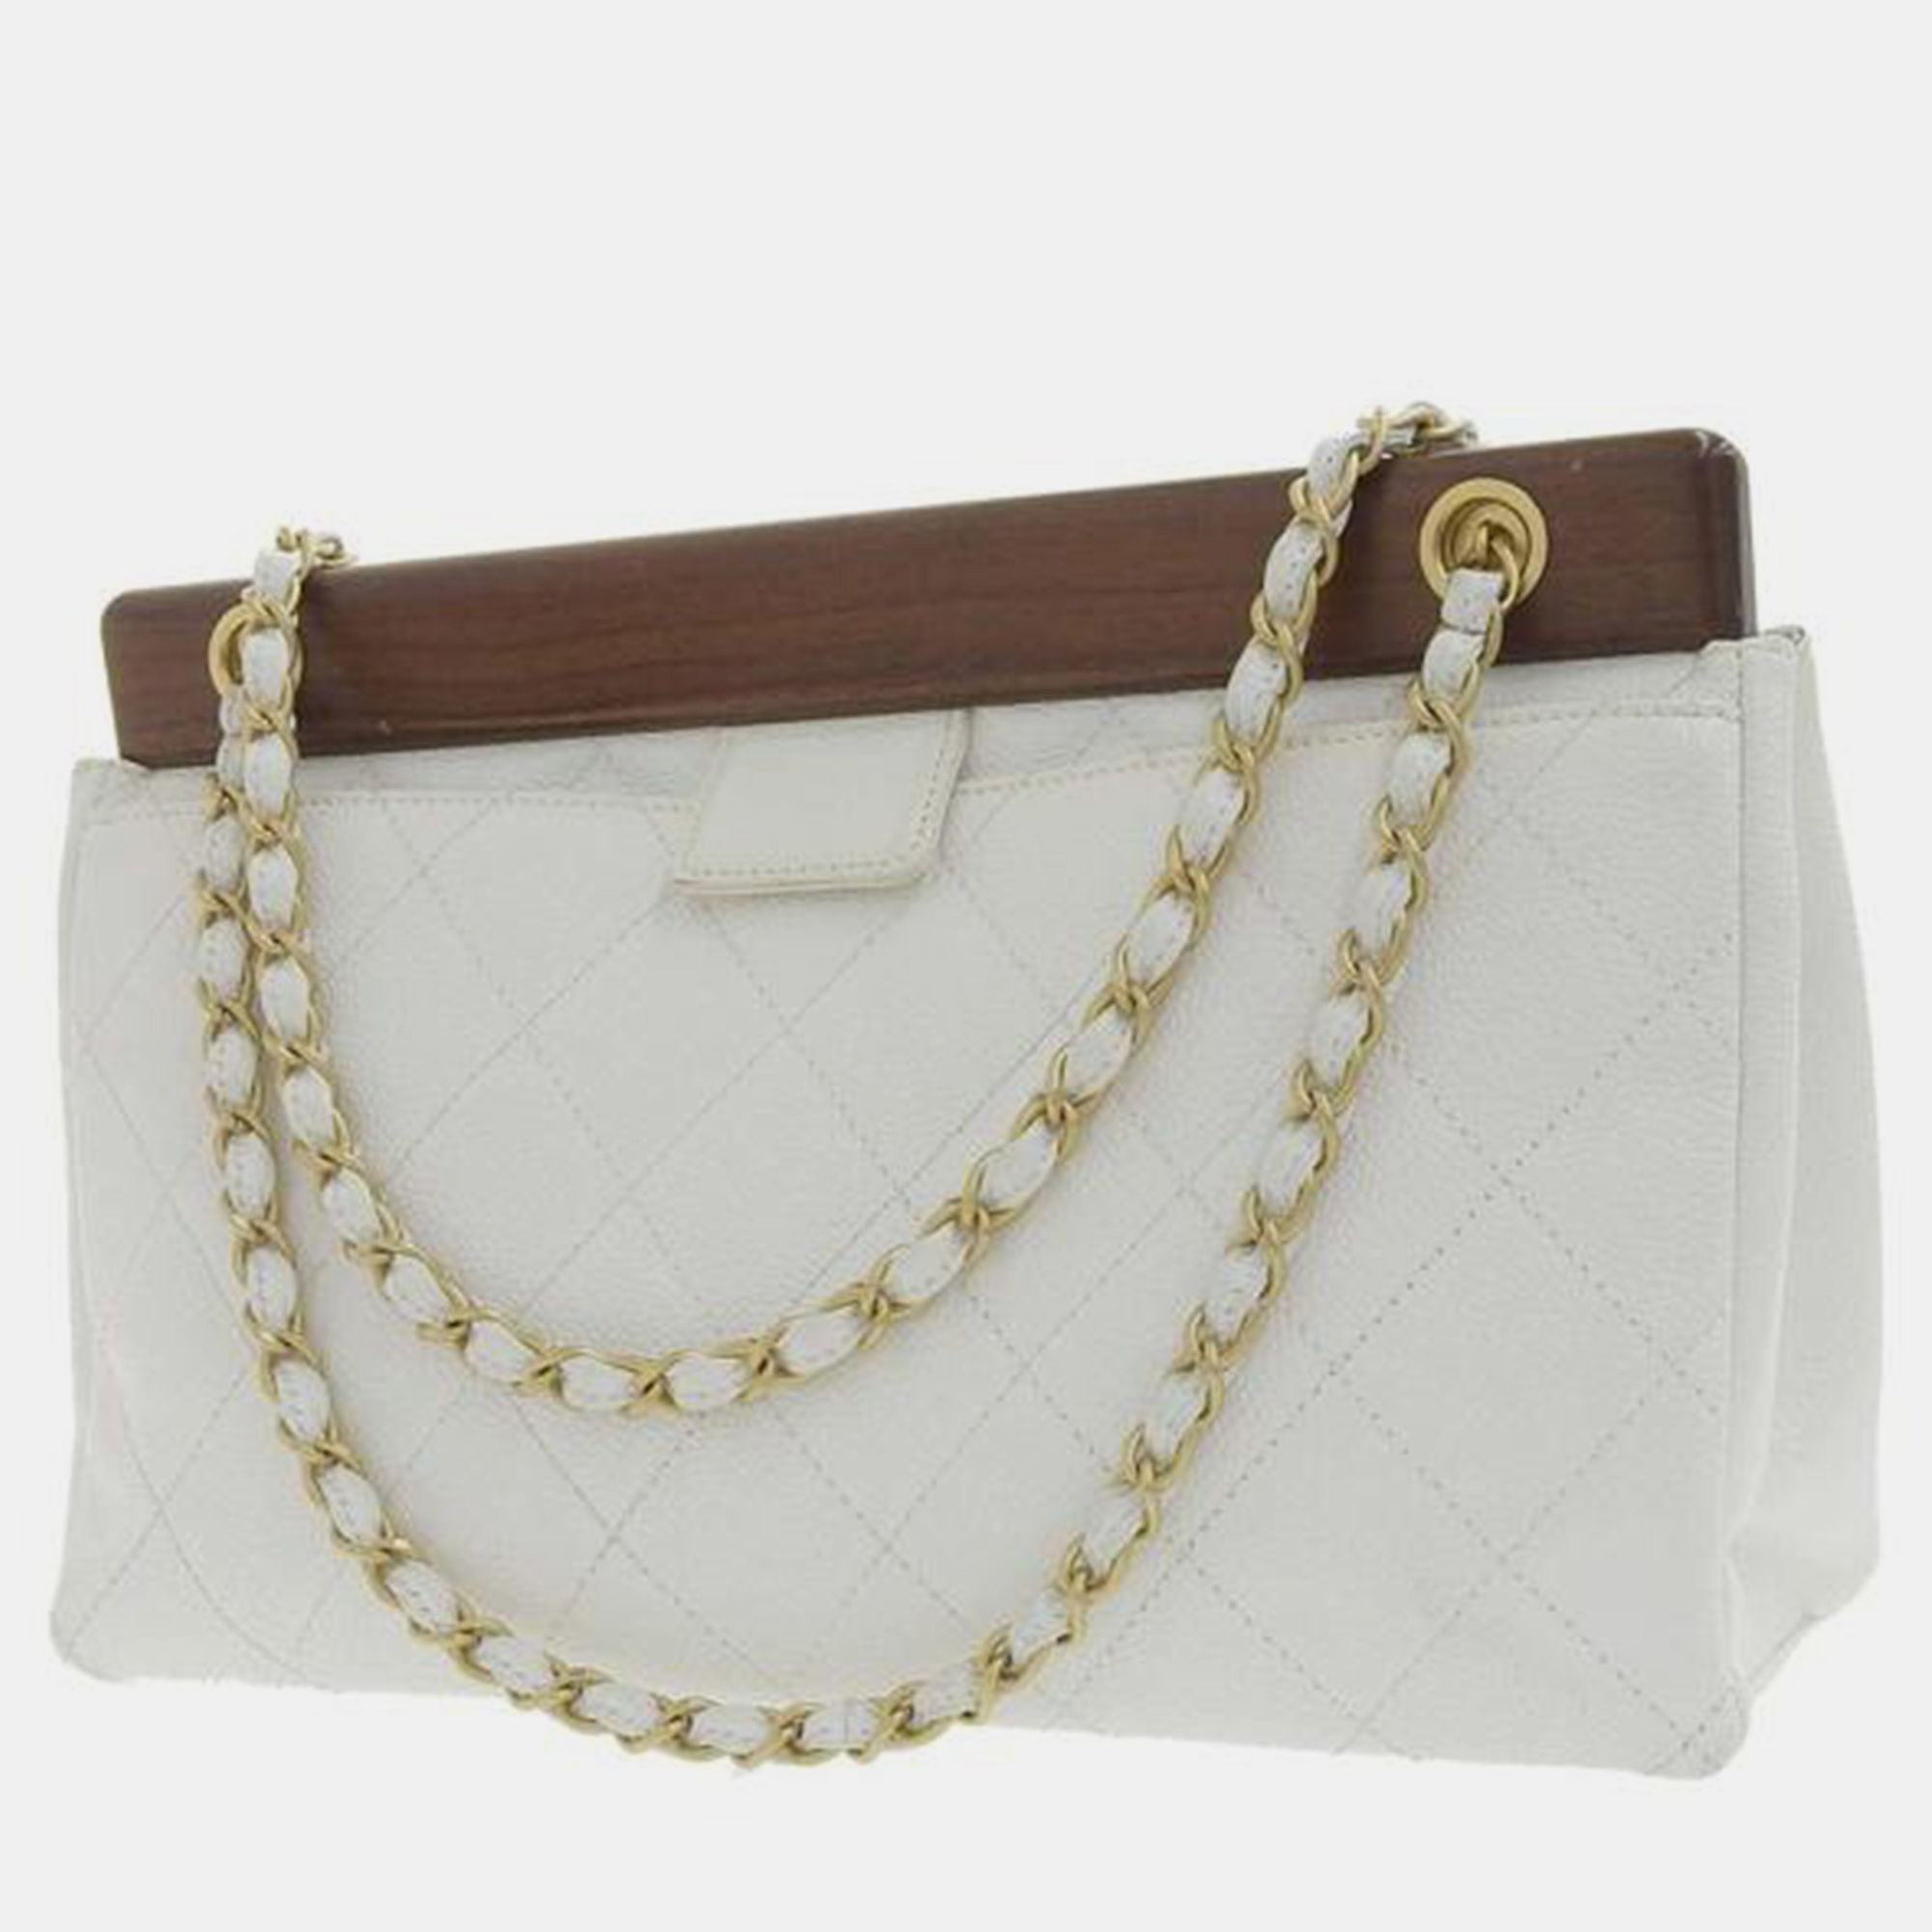 Chanel white cc quilted caviar wooden bar shoulder bag